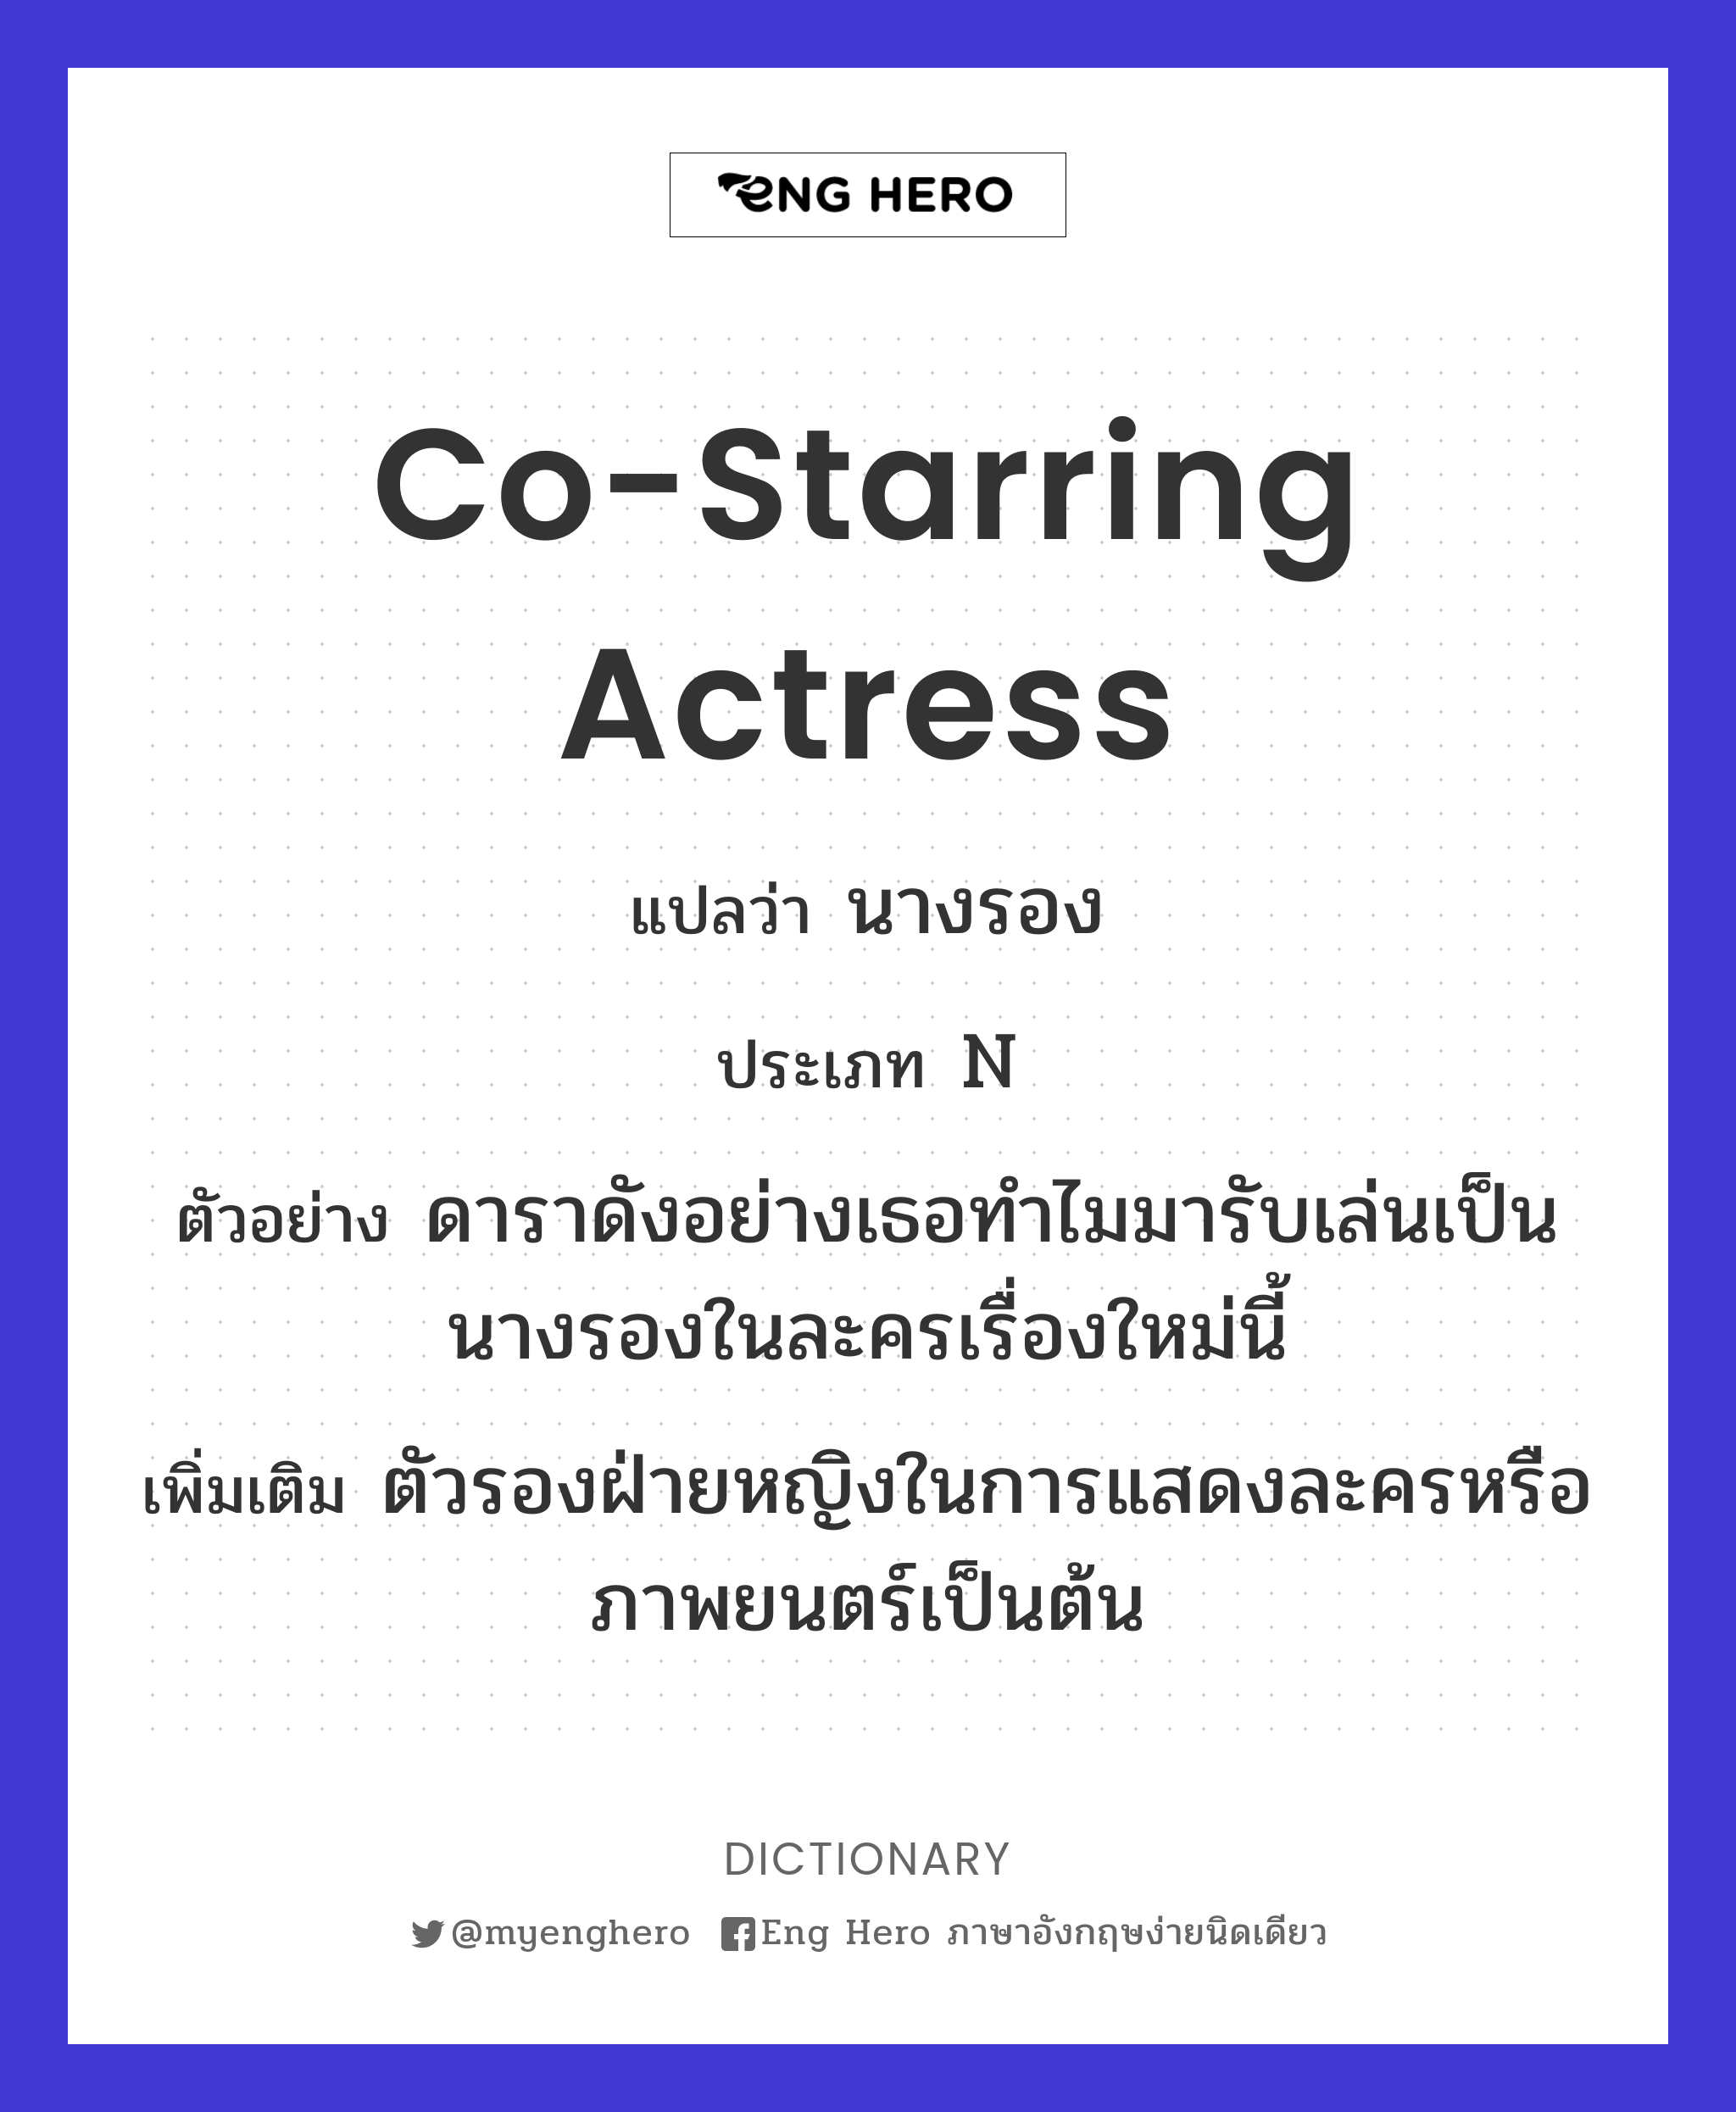 co-starring actress